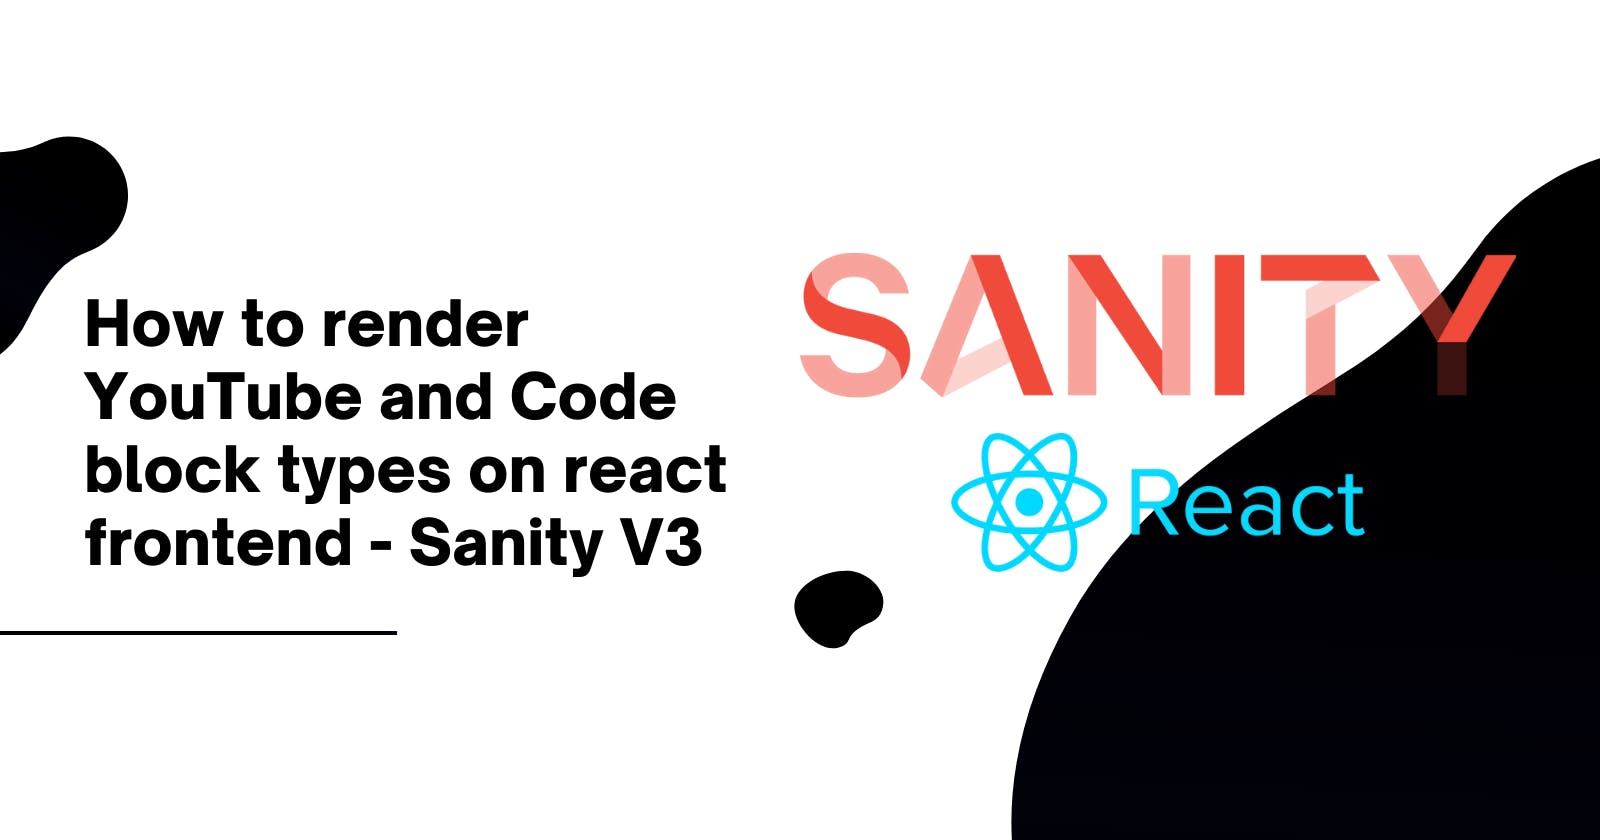 How to render YouTube and code block types on react frontend - Sanity V3